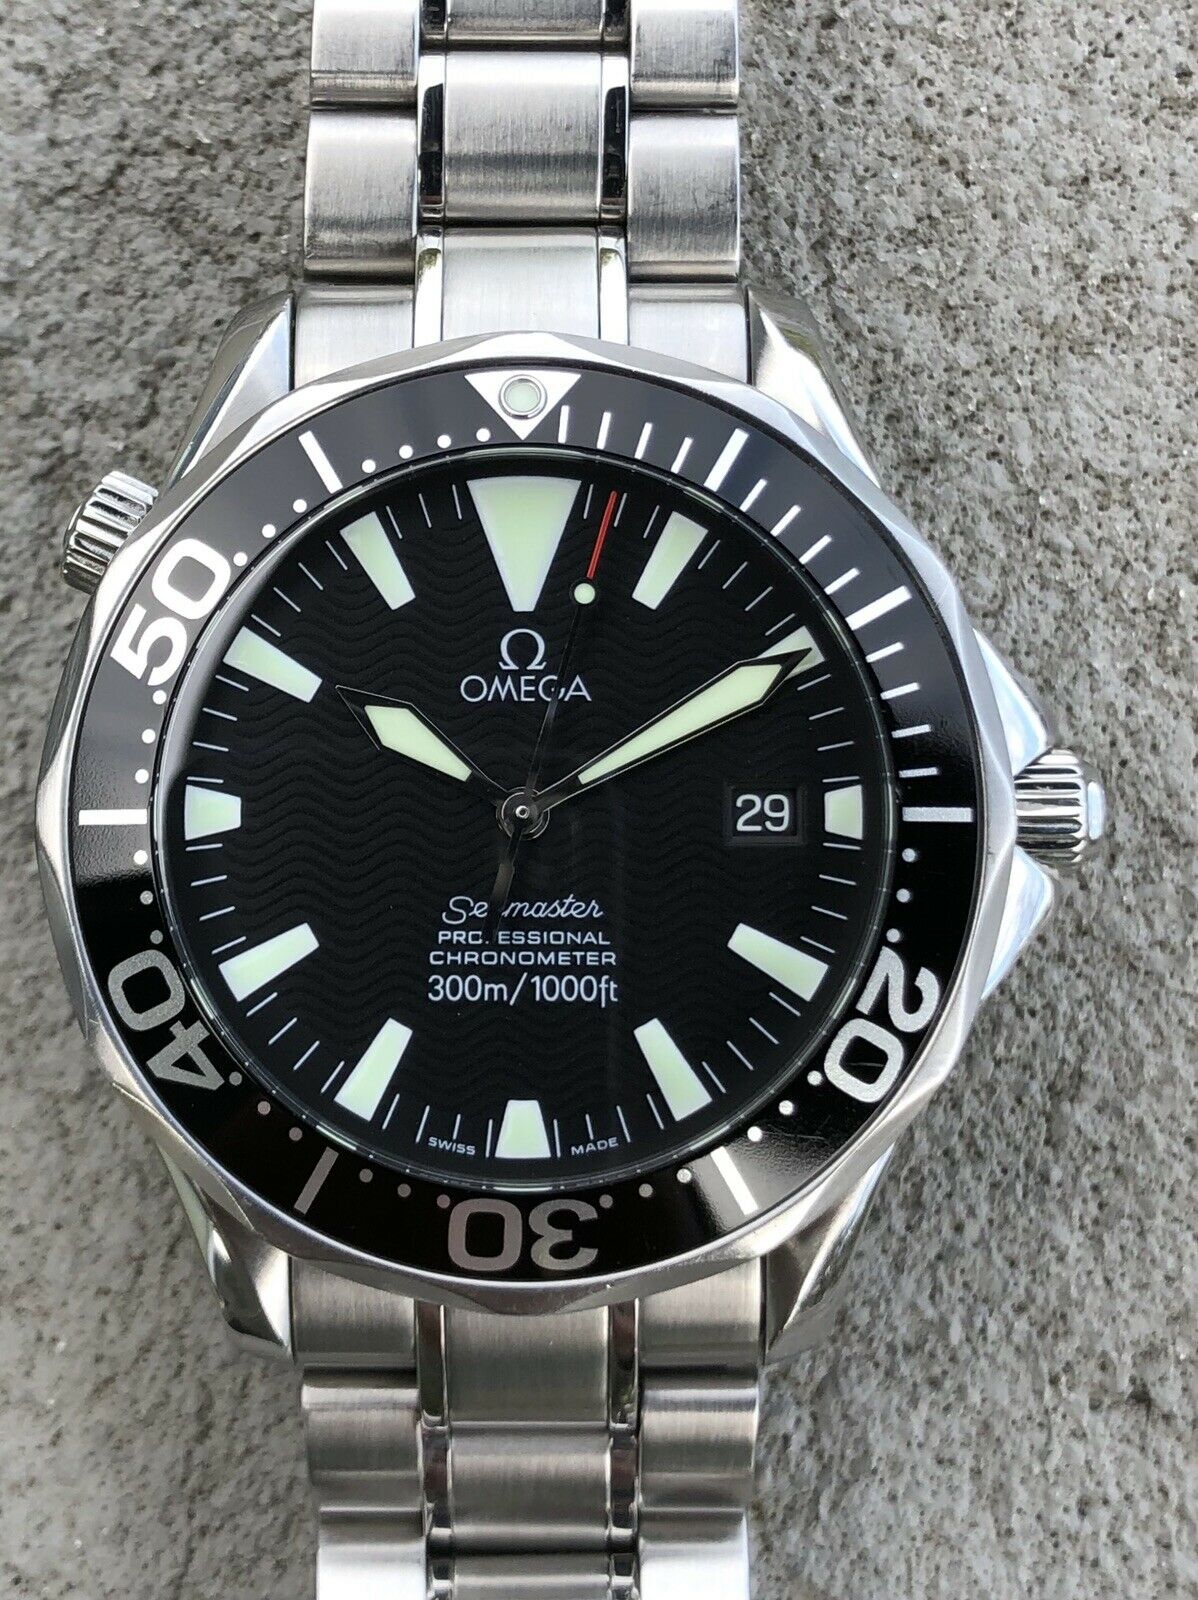 Omega_Seamaster_Professional_300M_2254.00_-_2007_w_box_and_papers_281_29.jpg